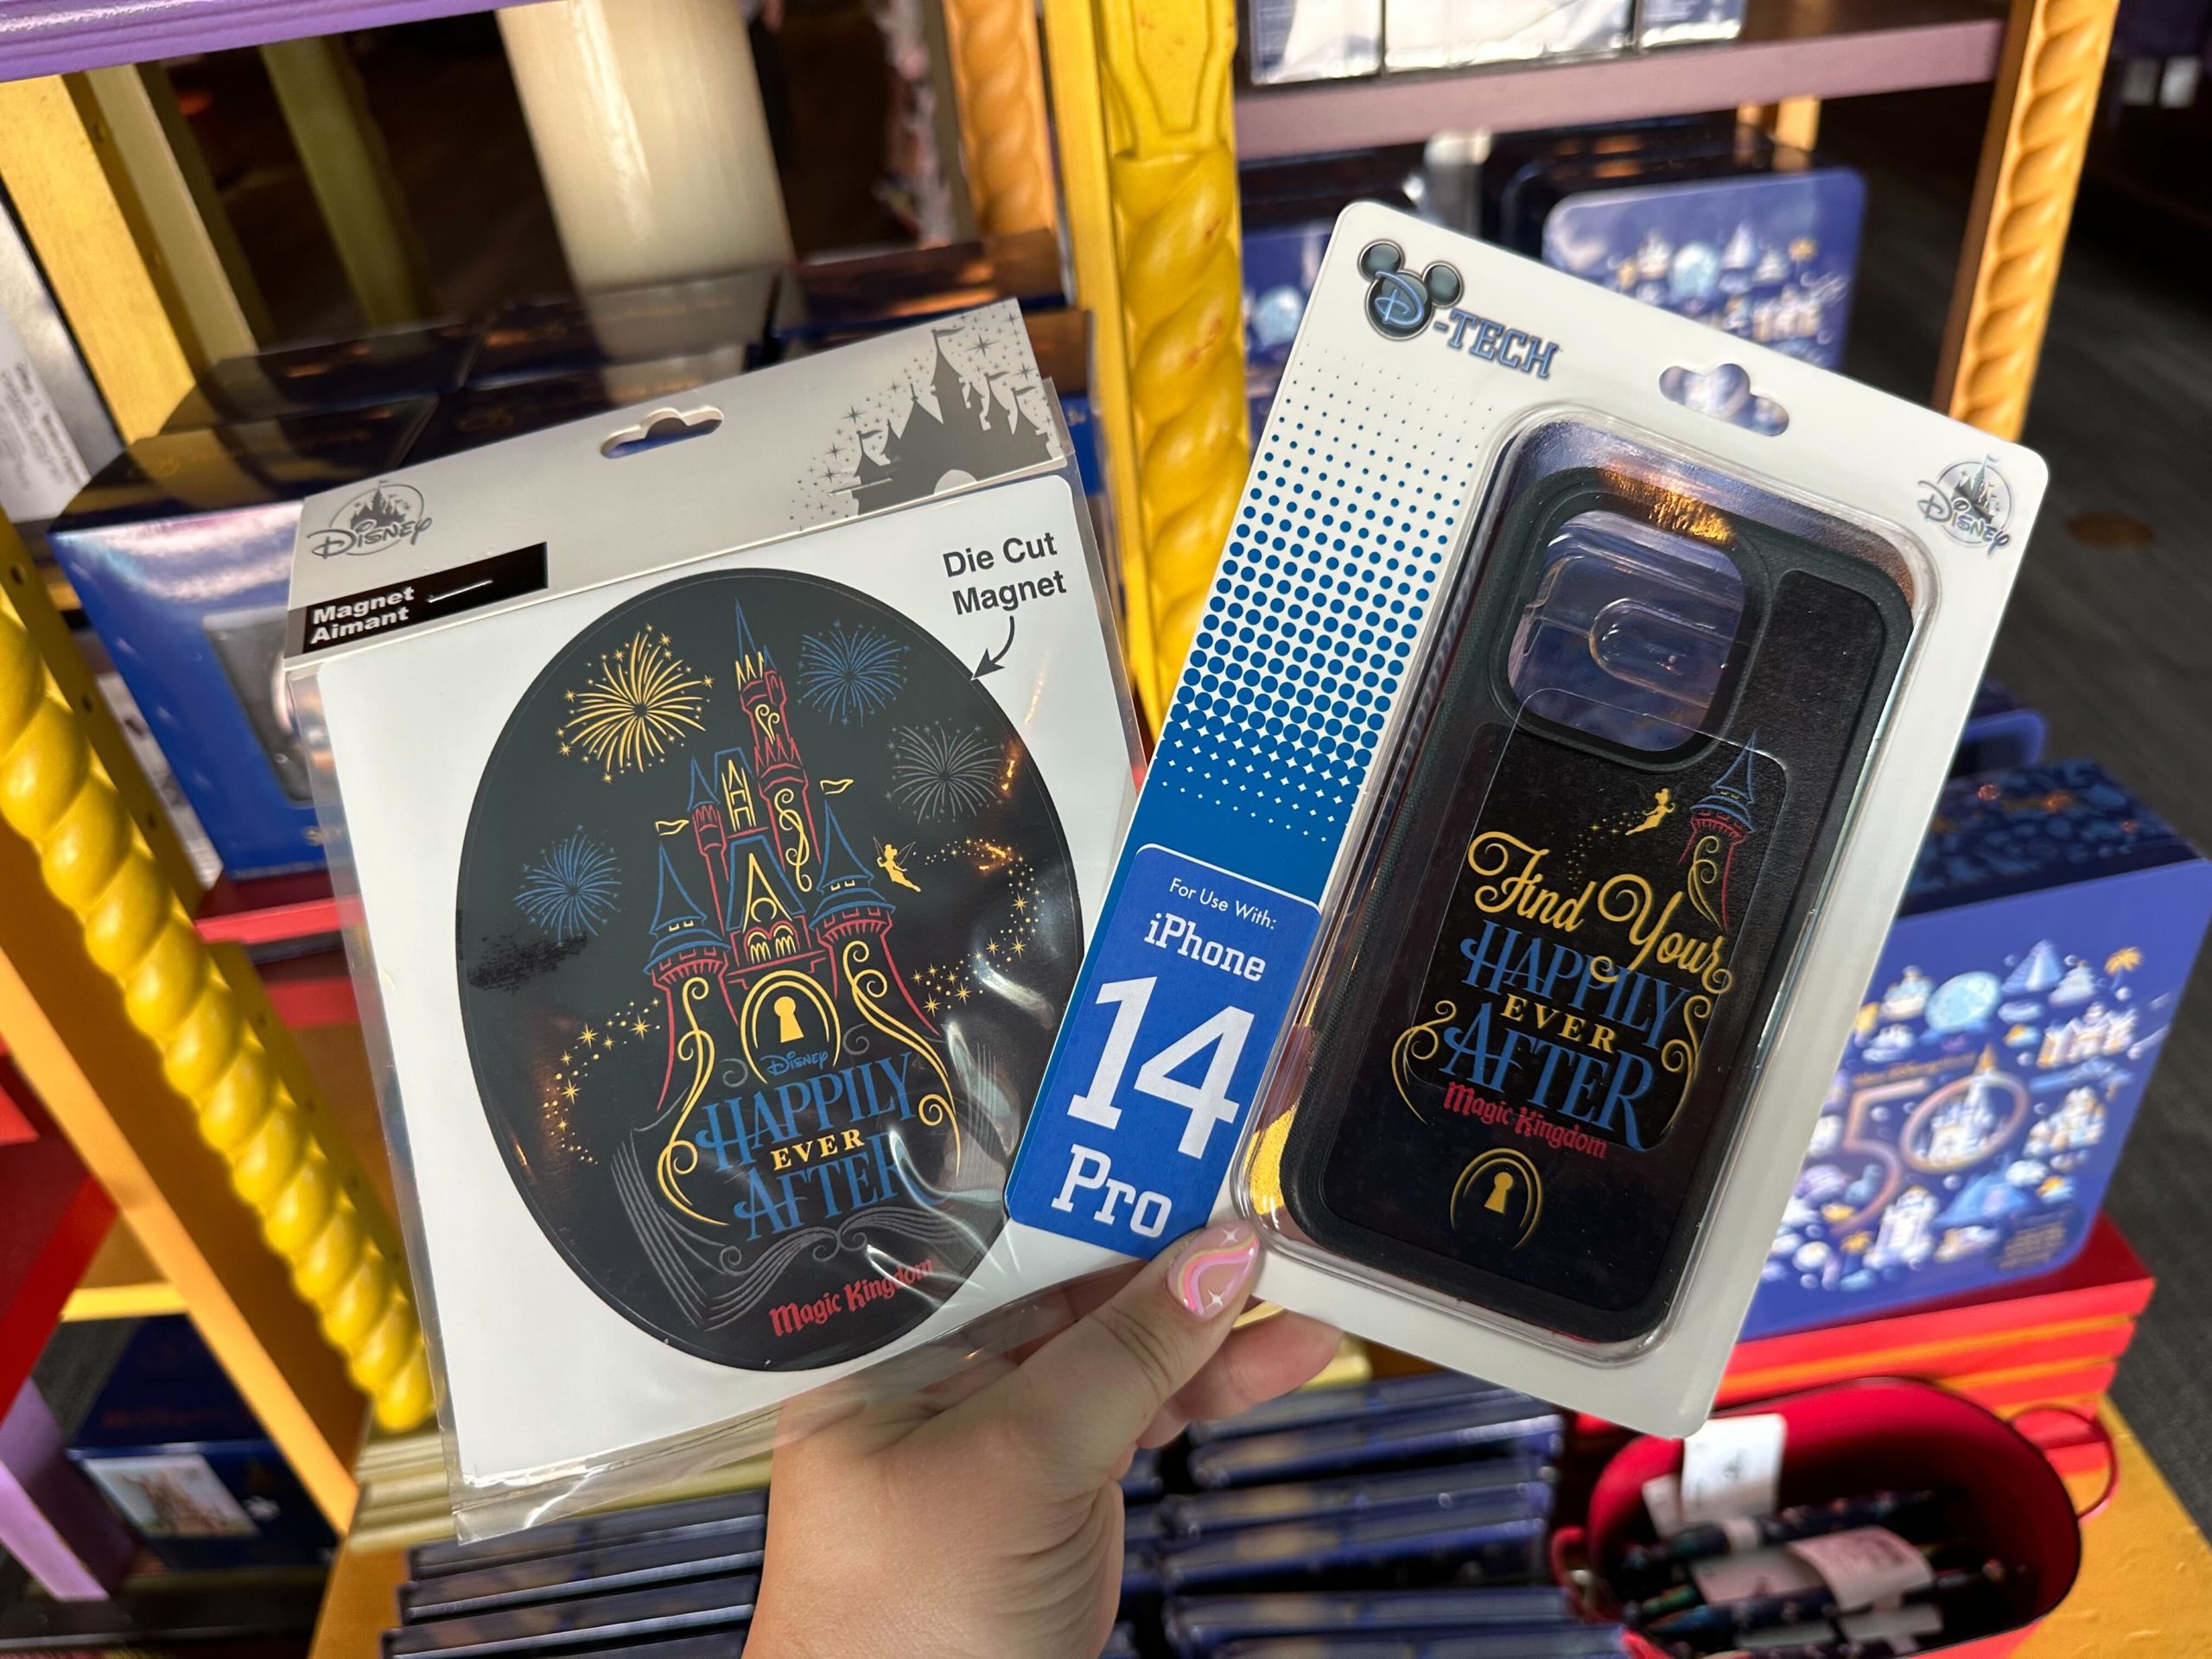 Happily Ever After' Poster Inspires Commemorative Merchandise at Magic  Kingdom Park